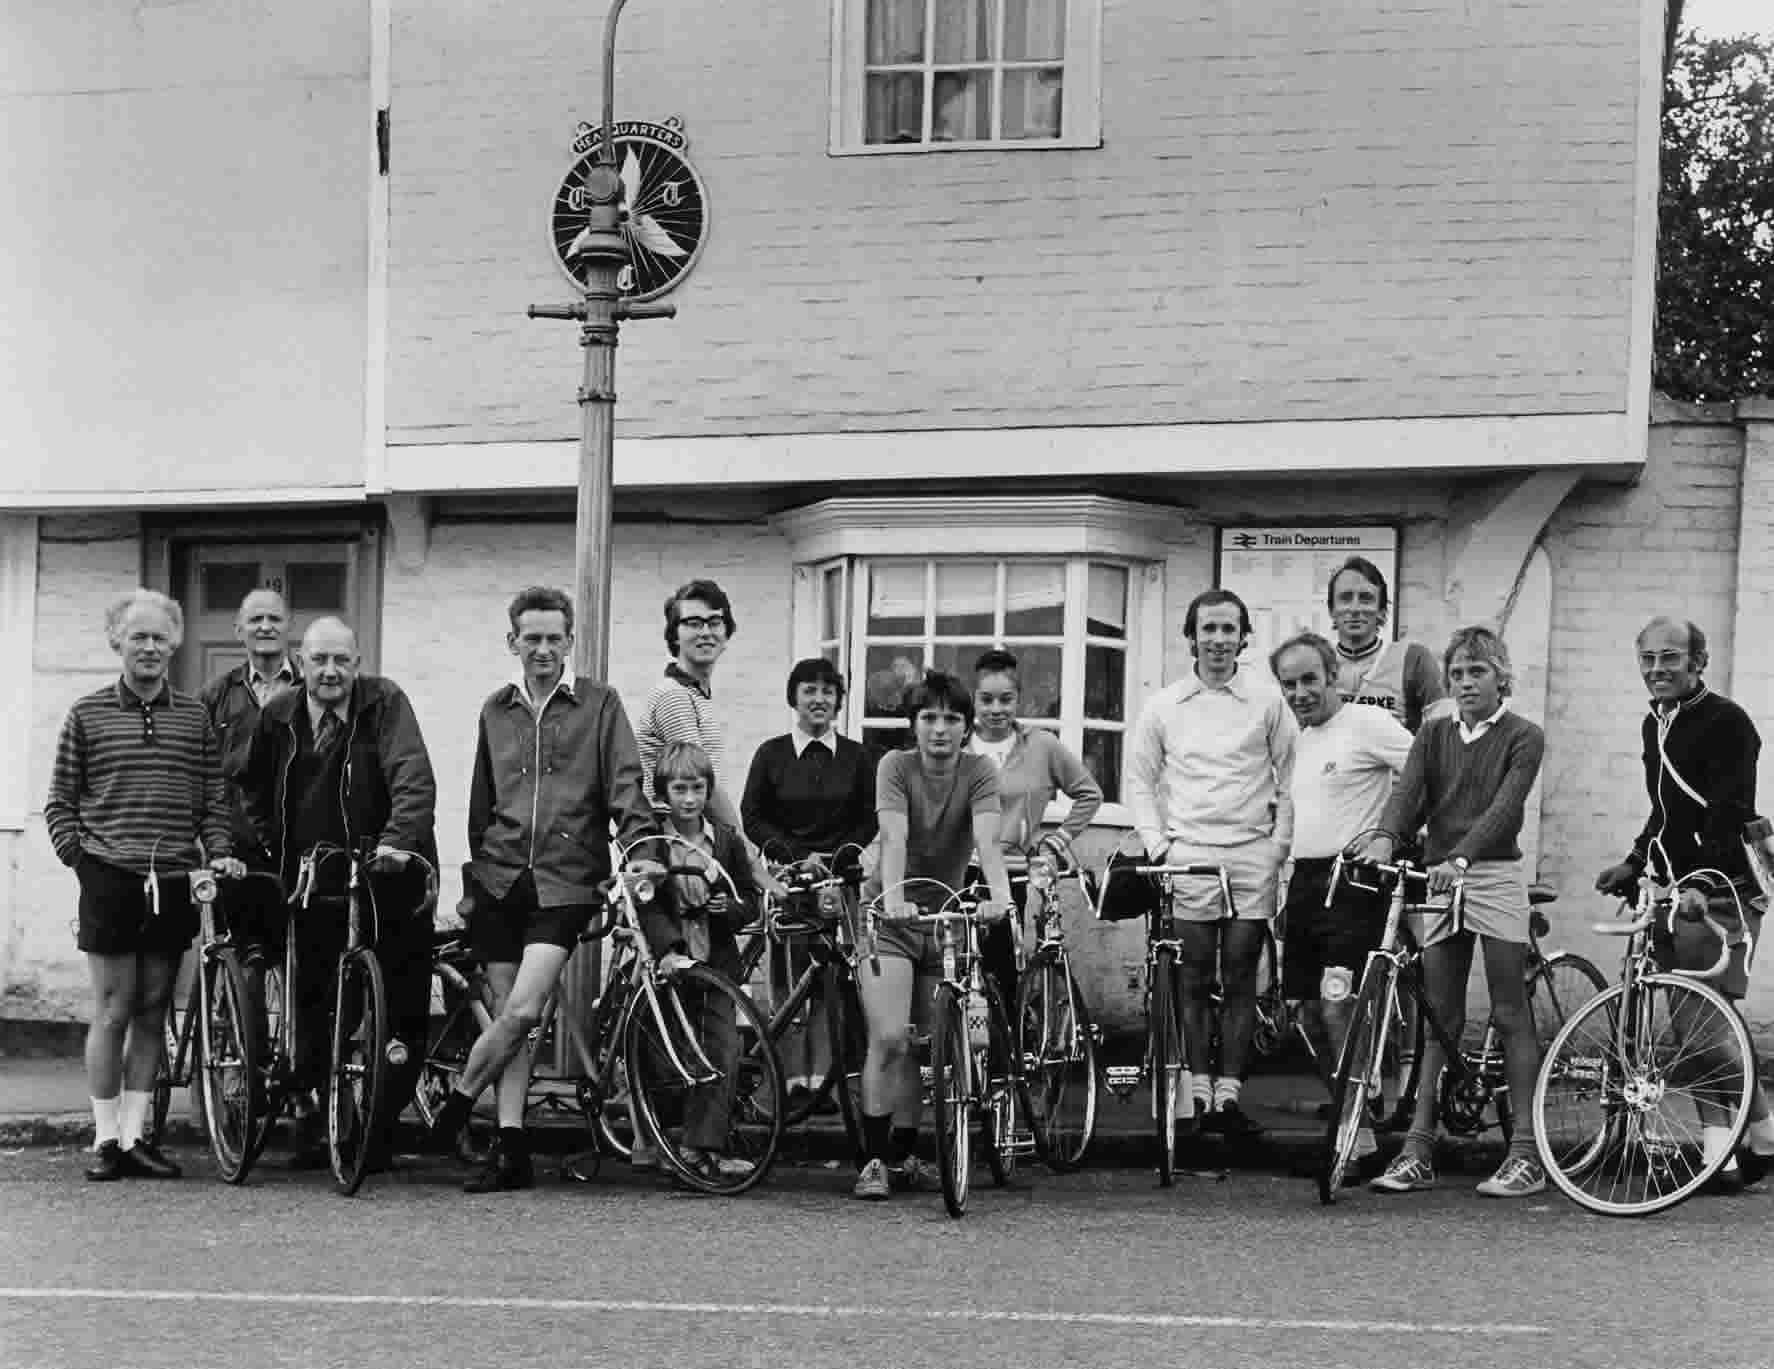 Clubrun, probably at Charing, late 1970s - Geoff Wilkins. Aubrey Ring, Gordon Cronk, Laurie Broad, Richard Broad, Jane ?, Therese Mason, ??, ??, ??, Don Beevis, ??, ??, Mike Pitches